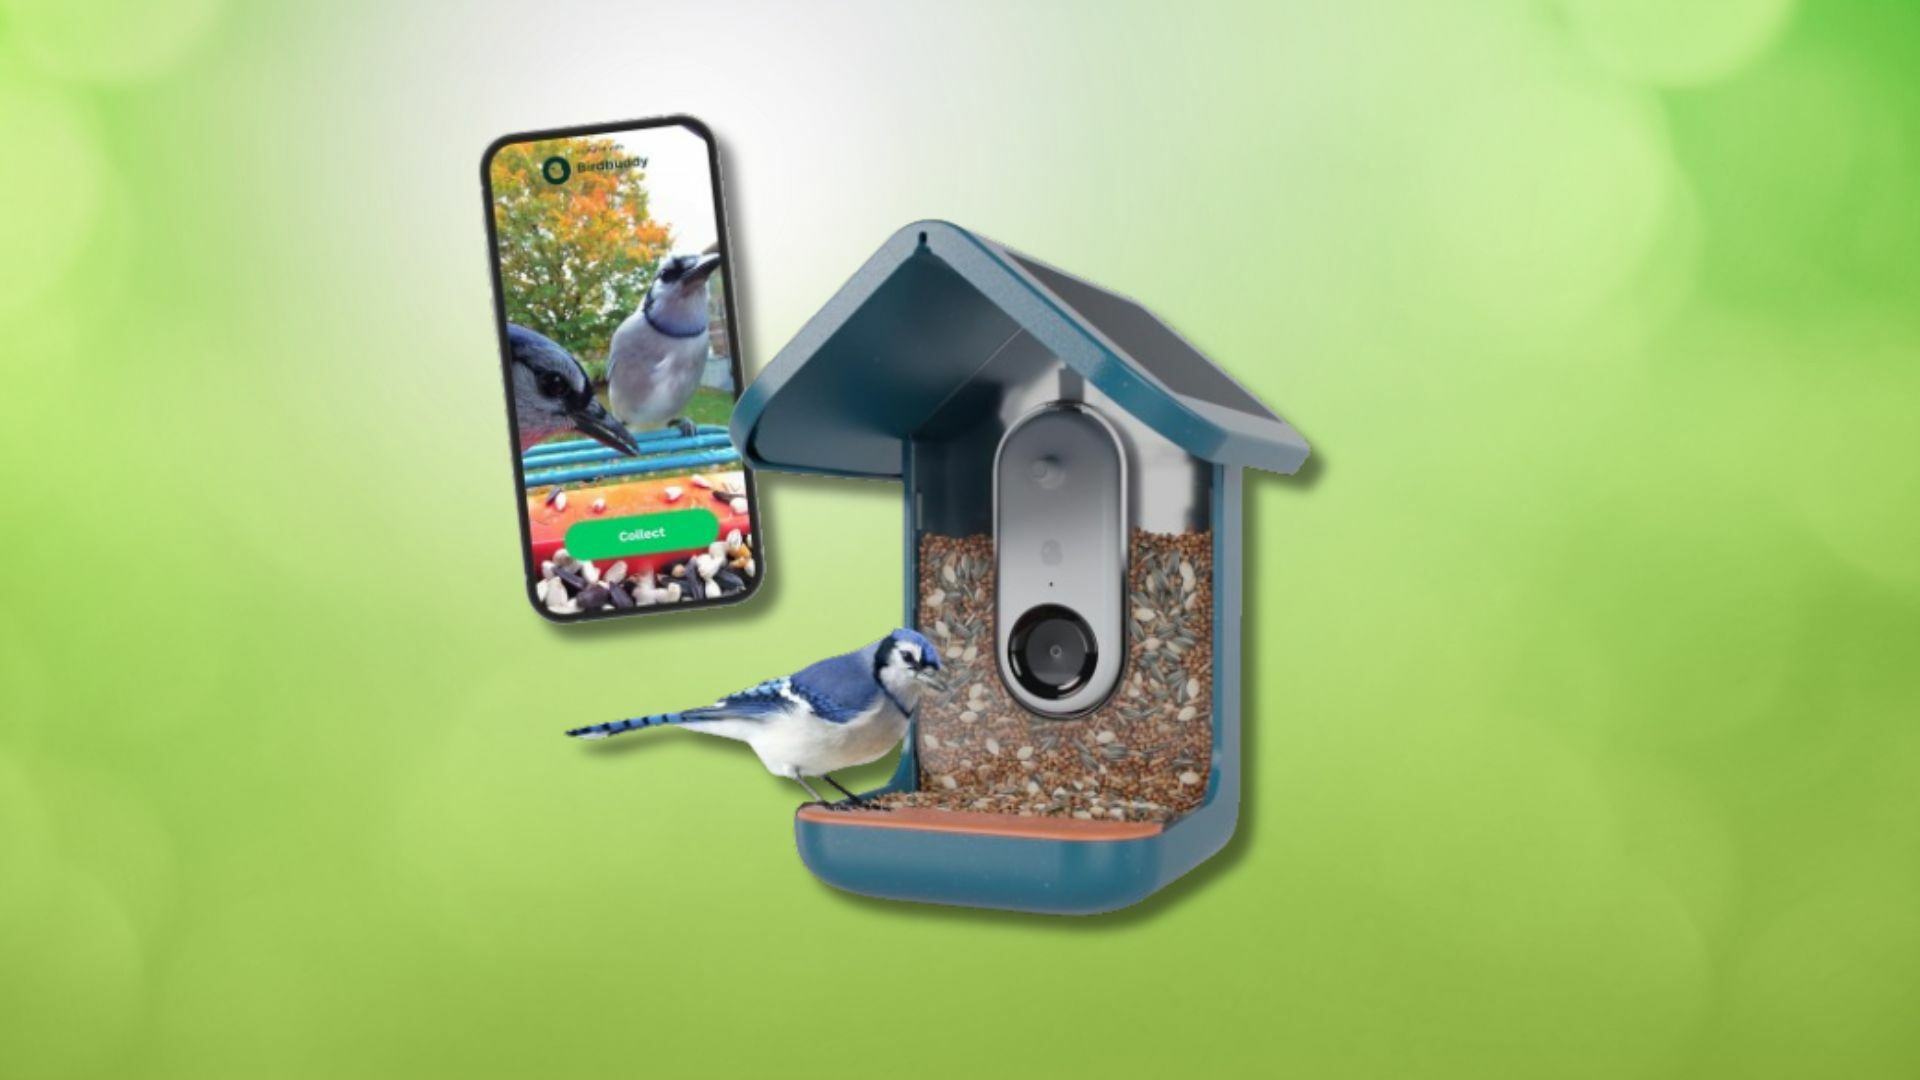 A Bird Buddy and a smartphone using the Bird Buddy app are pictured against a green background 